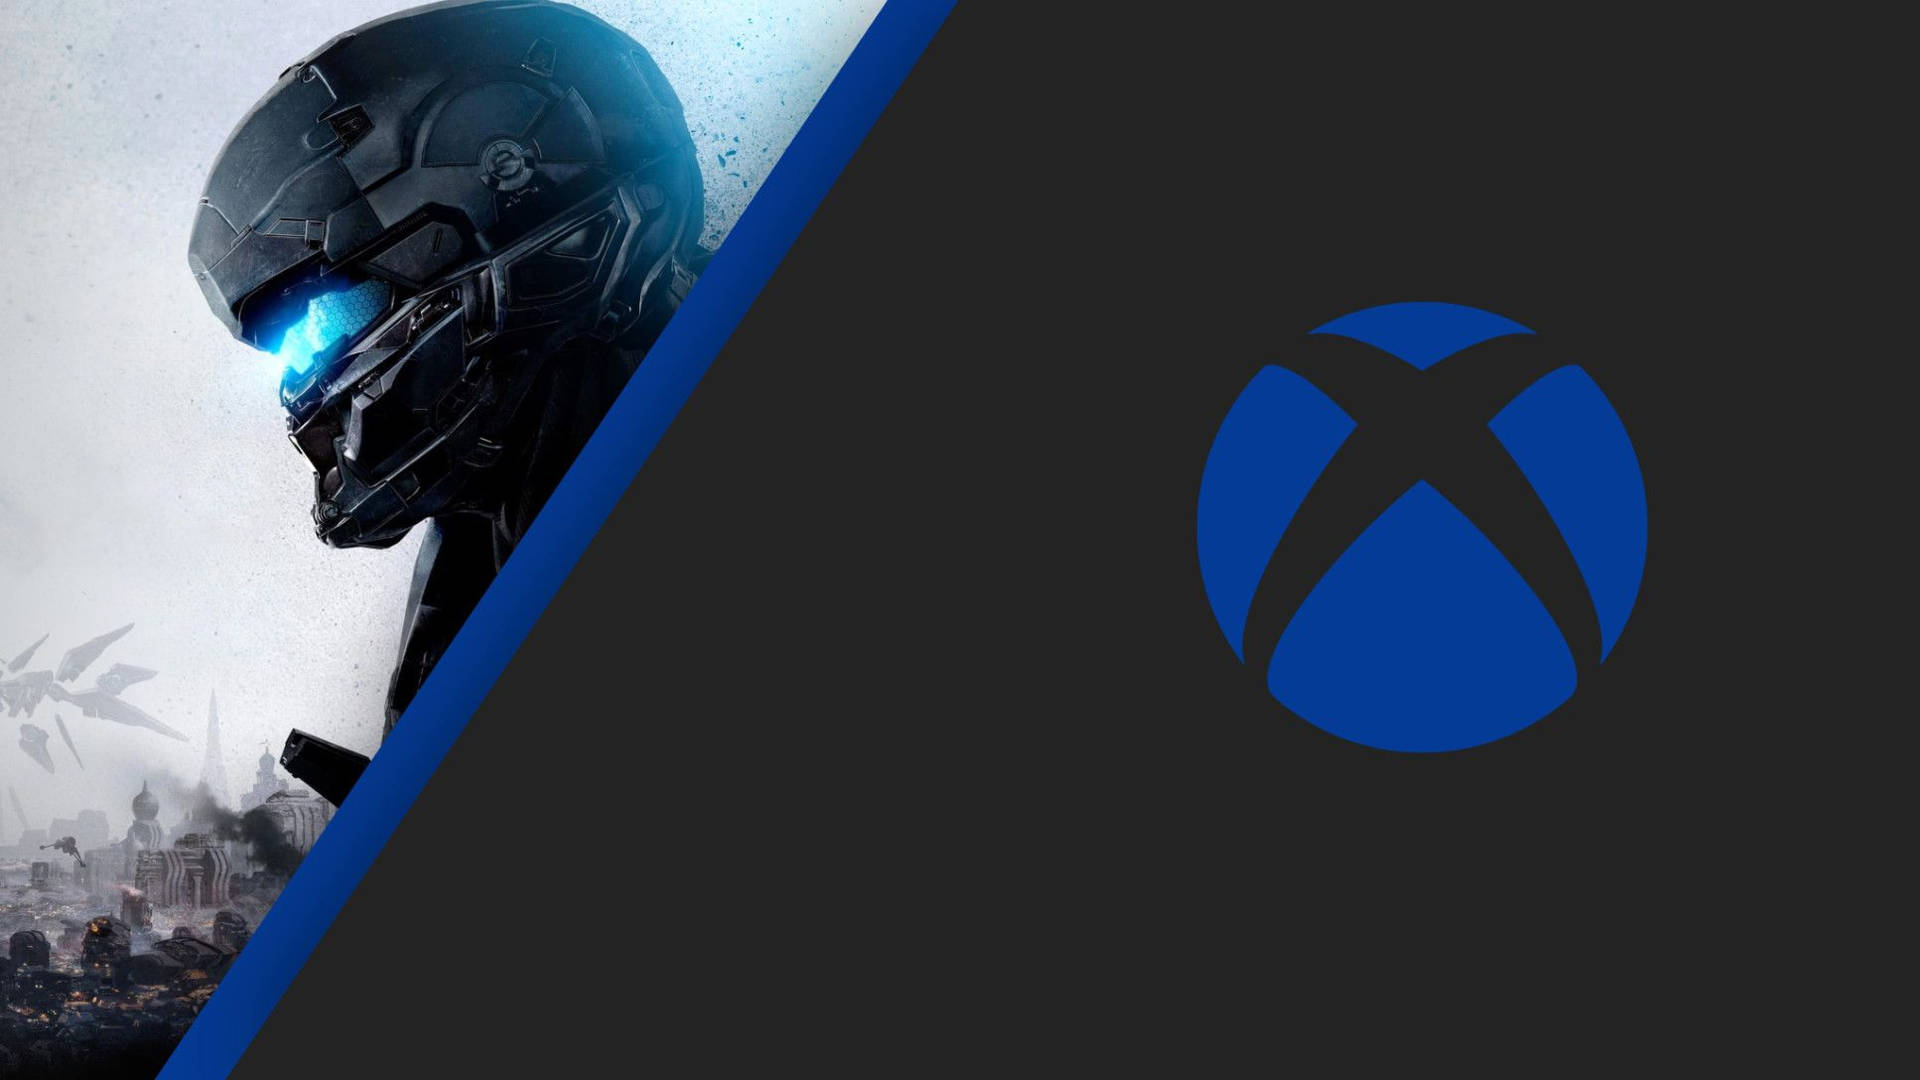 Xbox One X Halo 5 Guardians Wallpaper